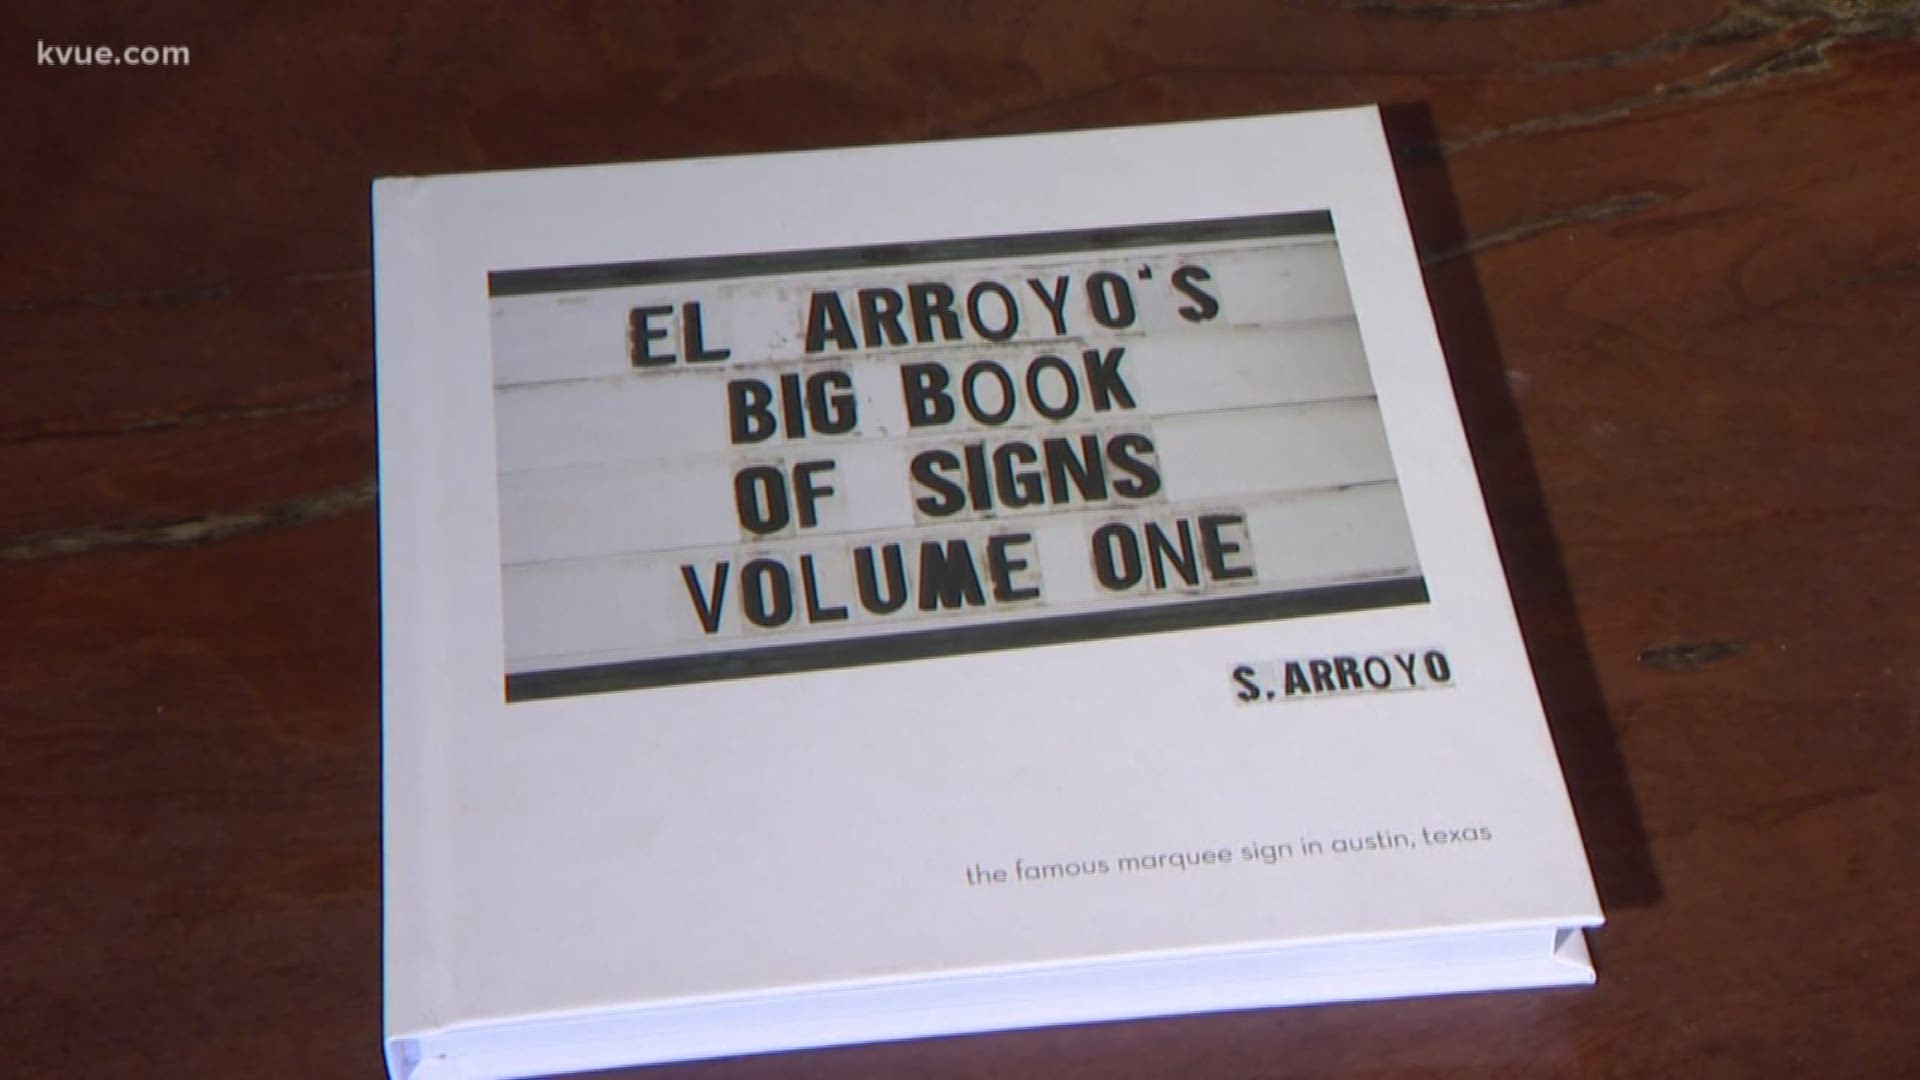 Downtown Austin's most famous marquee sign now has its own book.